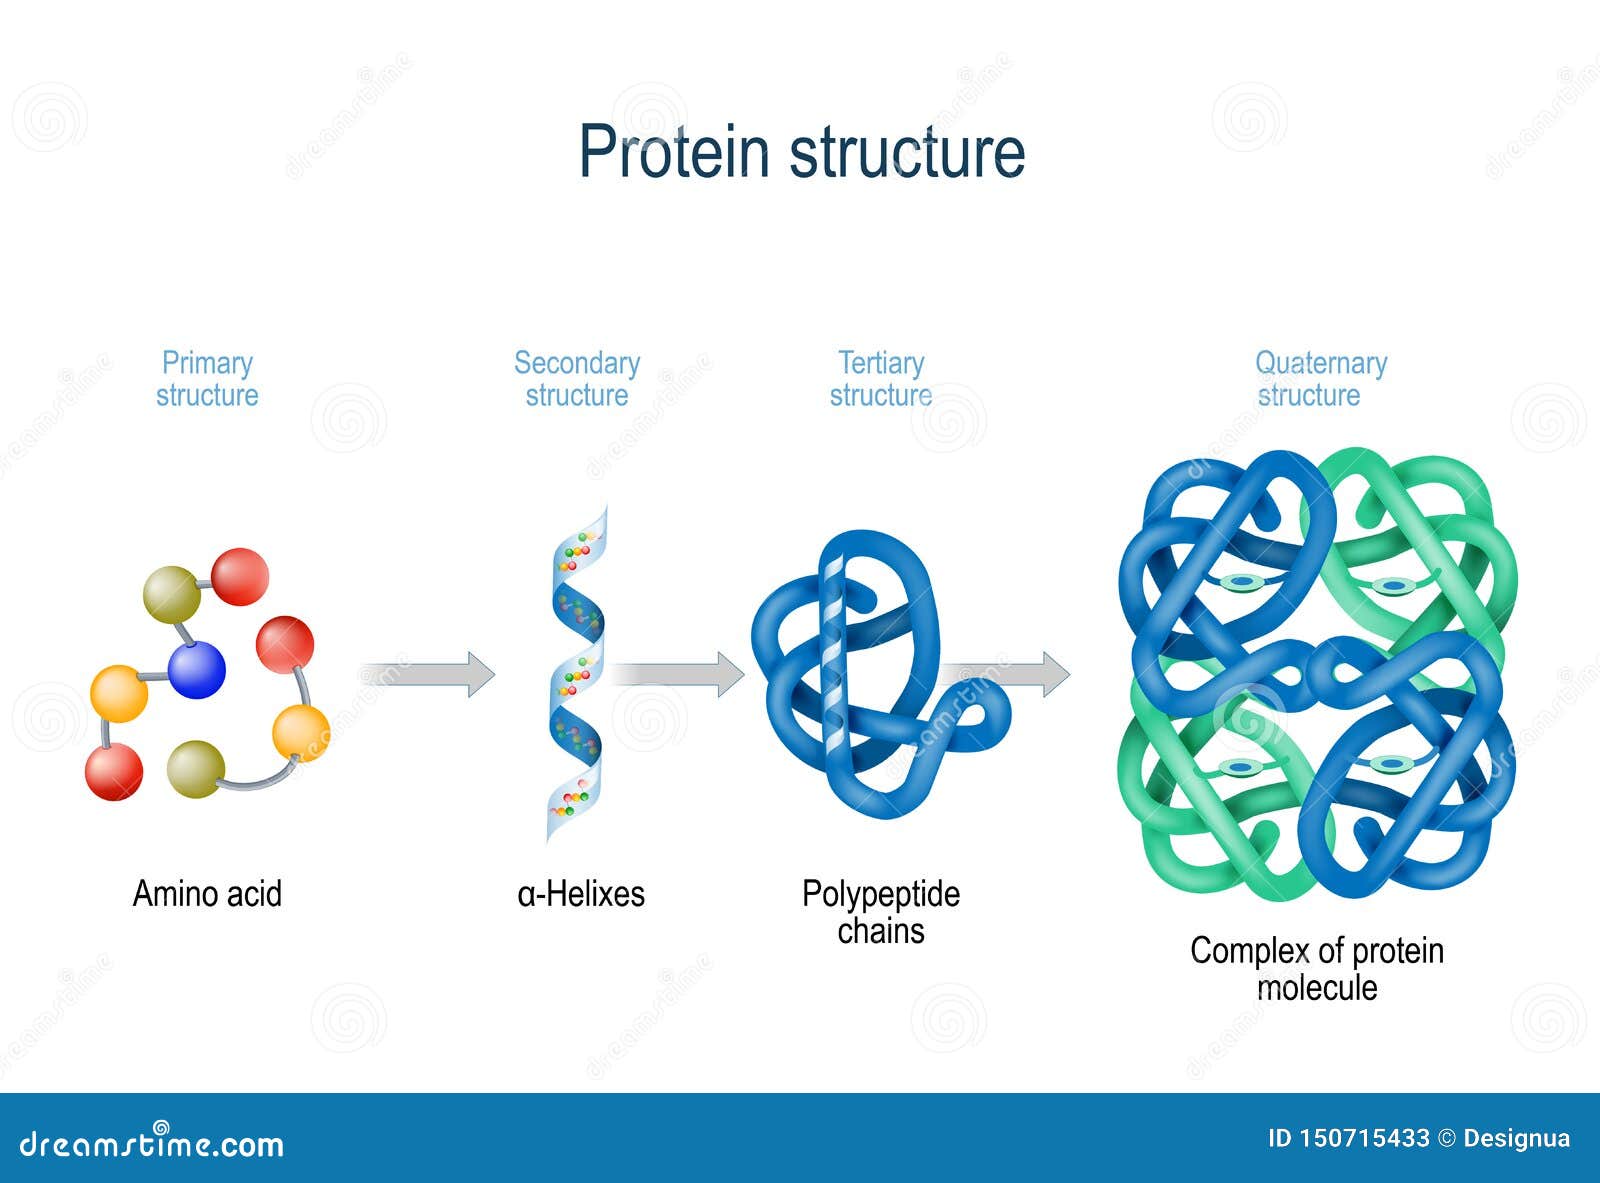 levels of protein structure from amino acids to complex of protein molecule